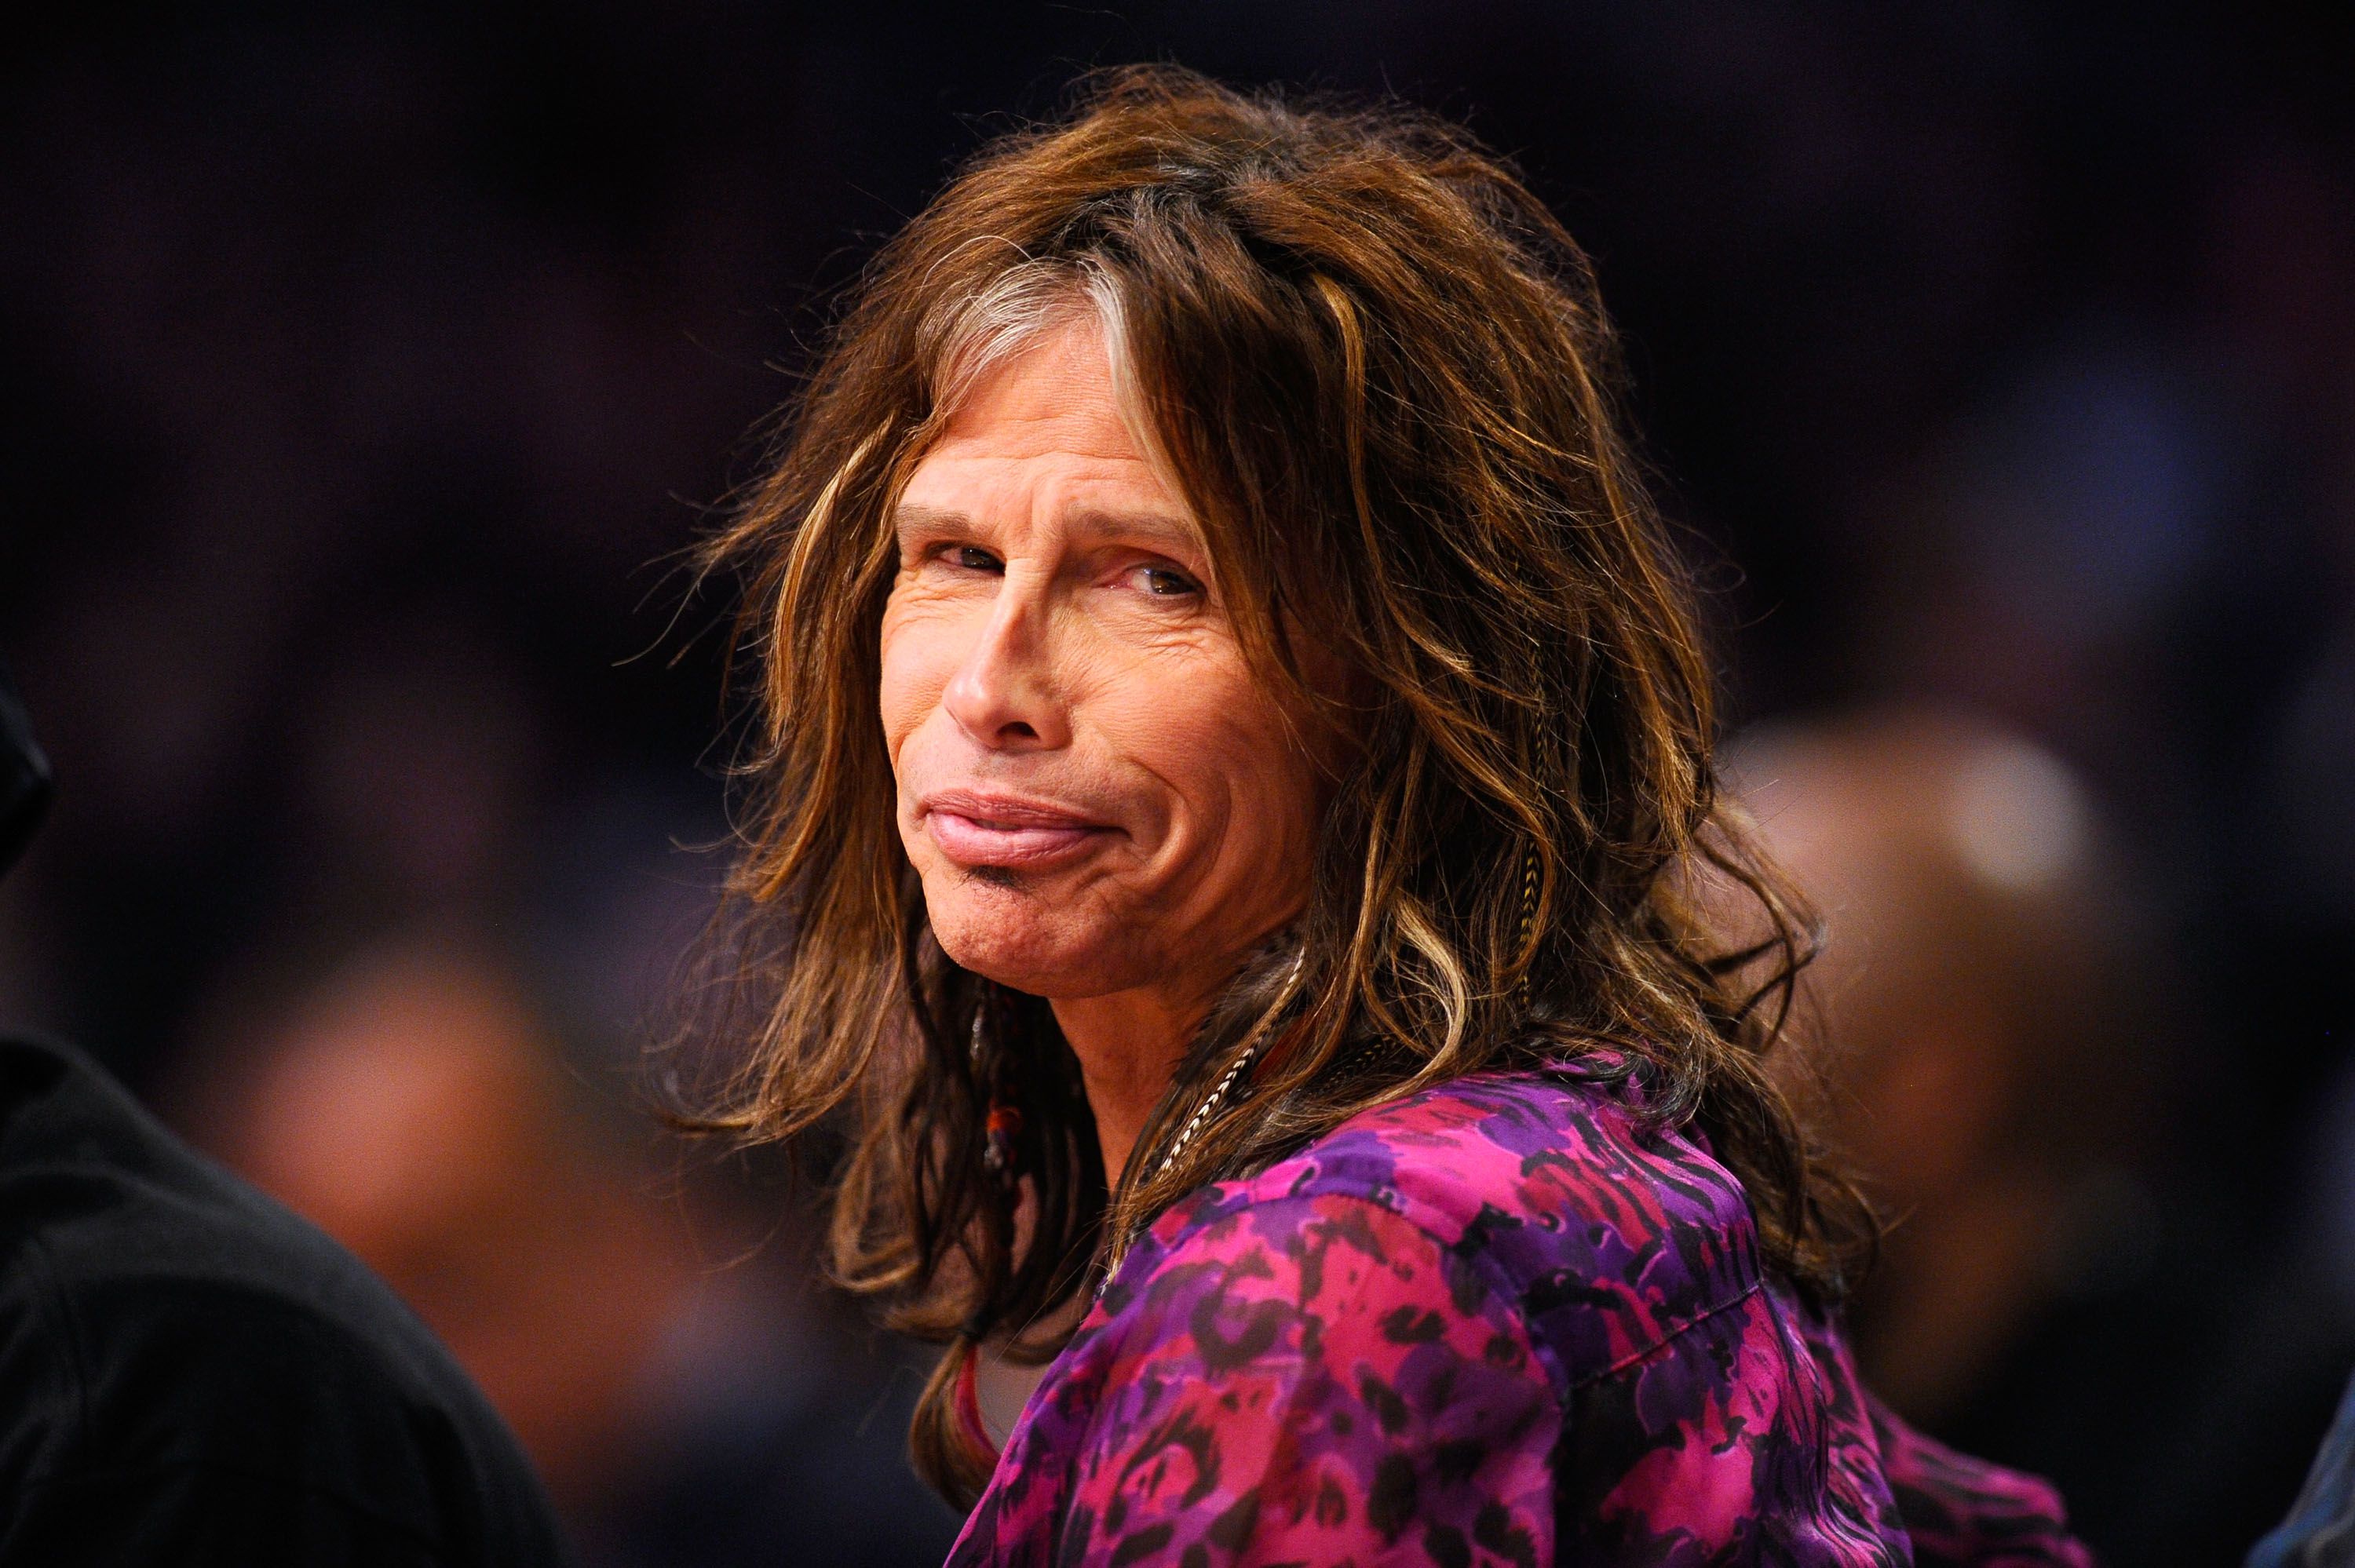 LOS ANGELES, CA - FEBRUARY 20: Musician Steven Tyler poses during the 2011 NBA All-Star game at Staples Center on February 20, 2011 in Los Angeles, California. (Photo by Kevork Djansezian/Getty Images)